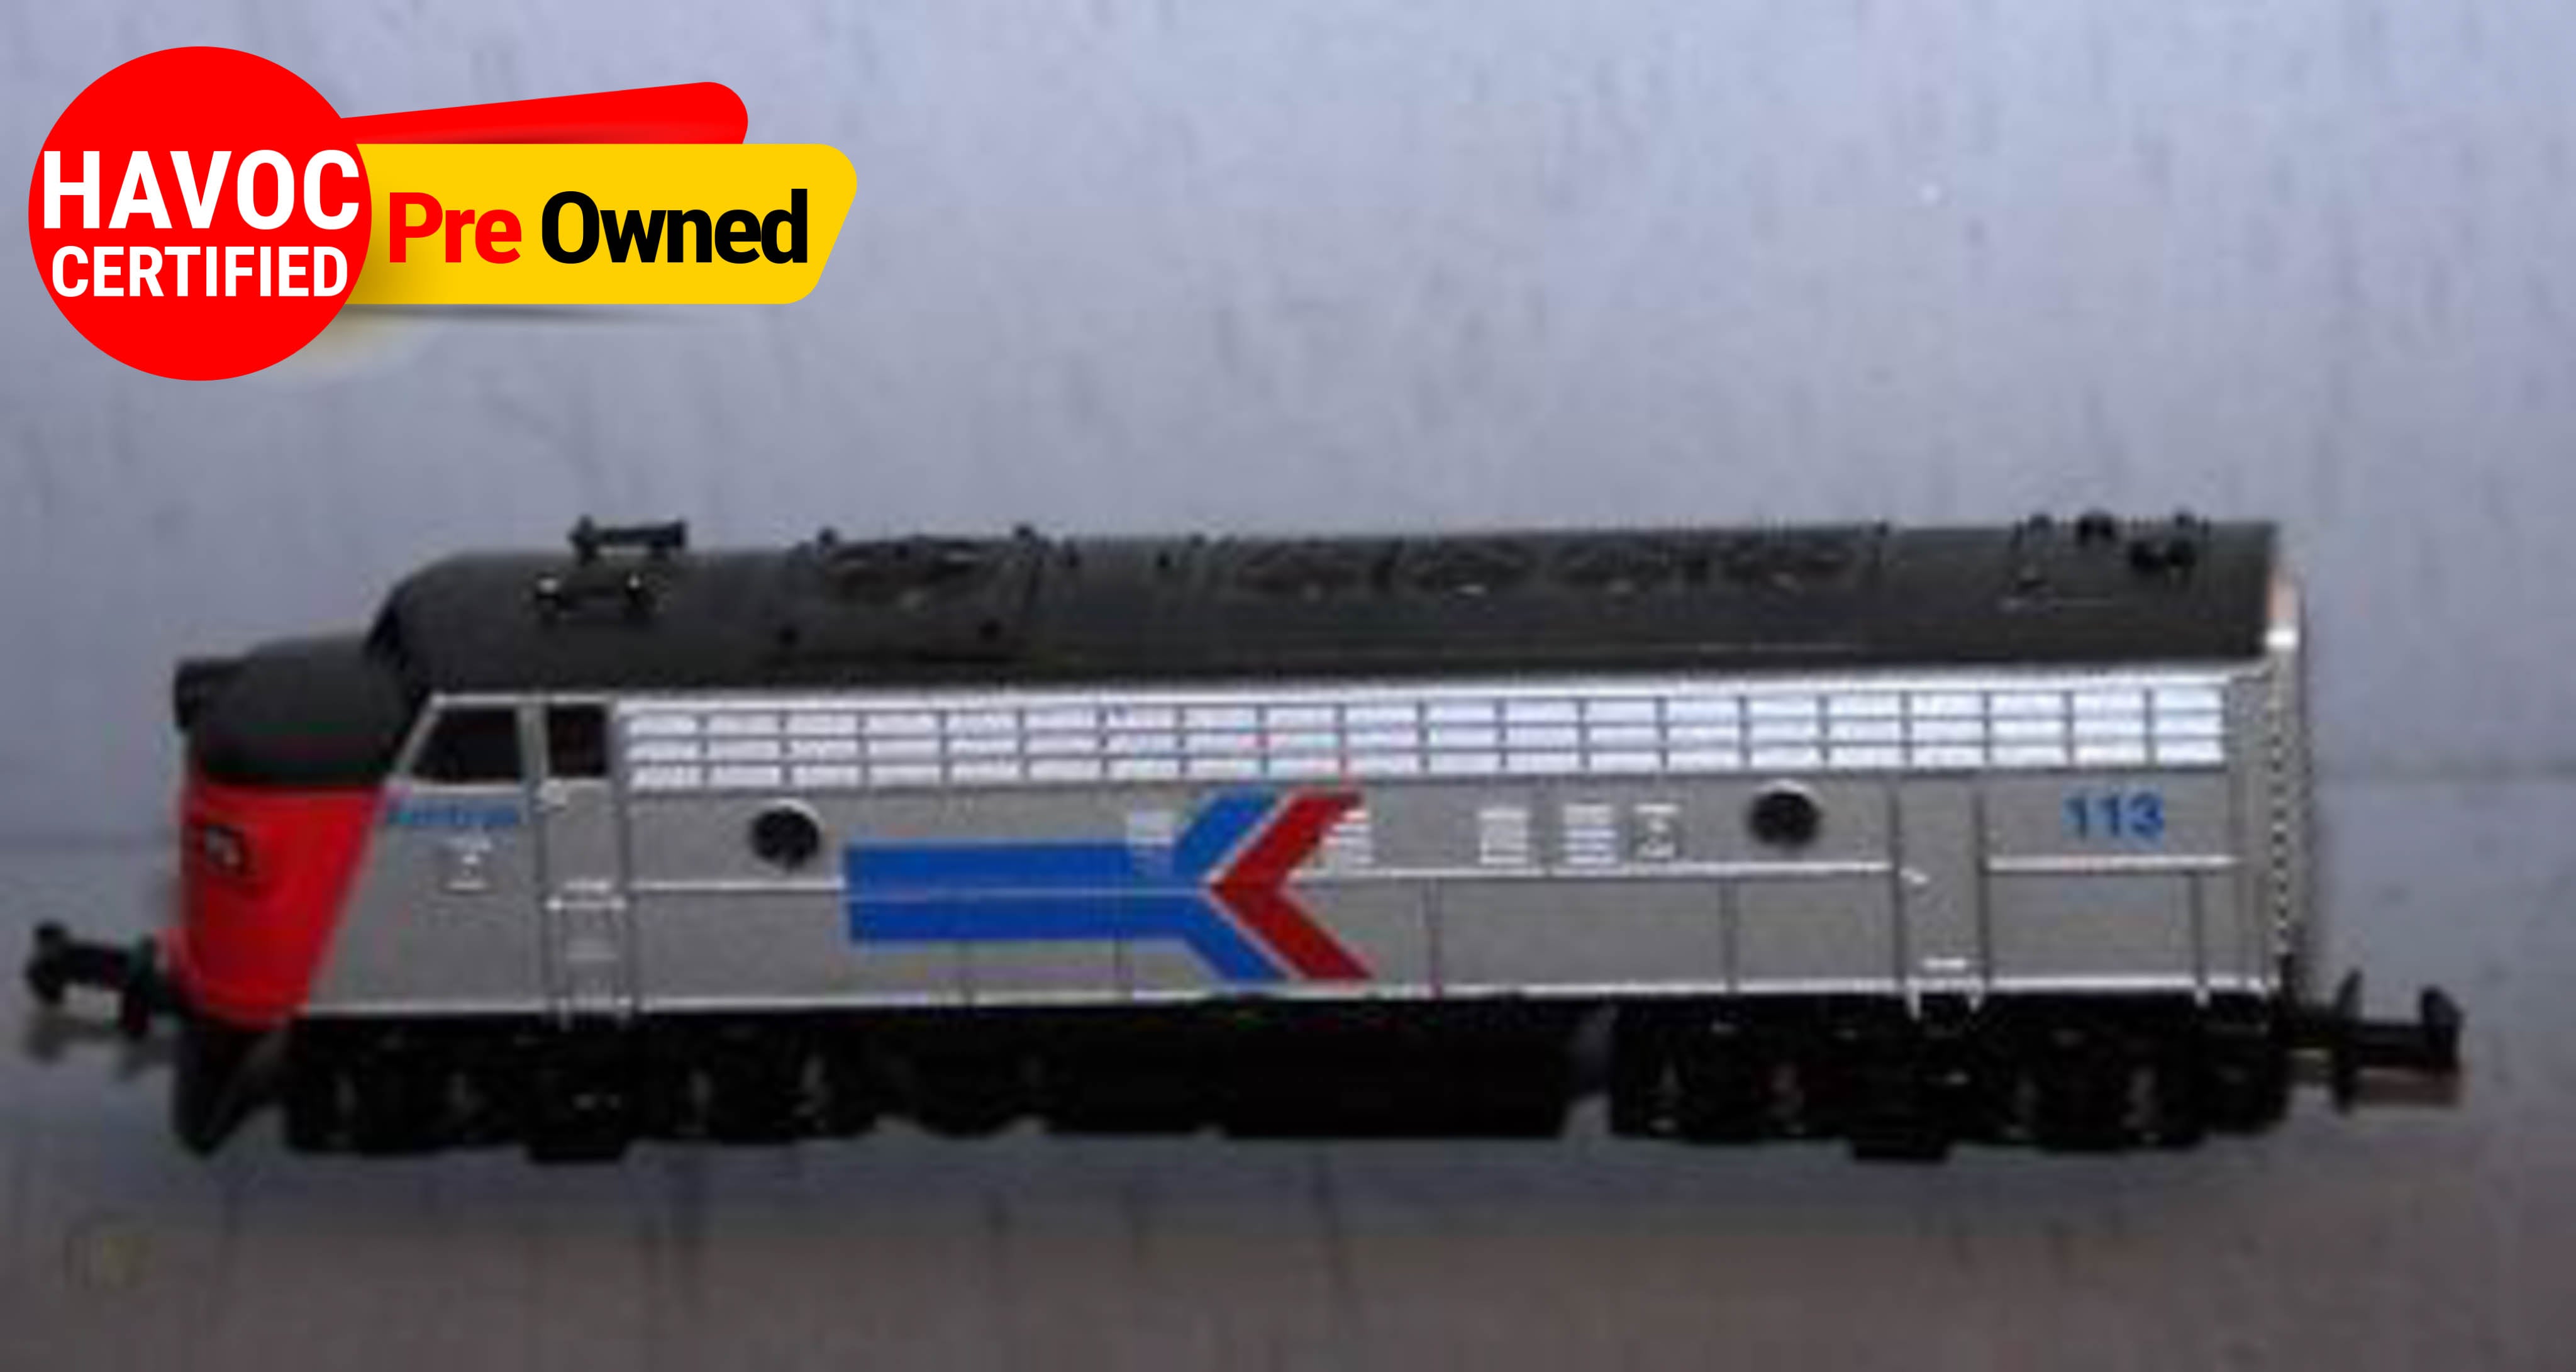 N SCALE ENGINE METAL AMTRAK(QUALITY PRE OWNED)